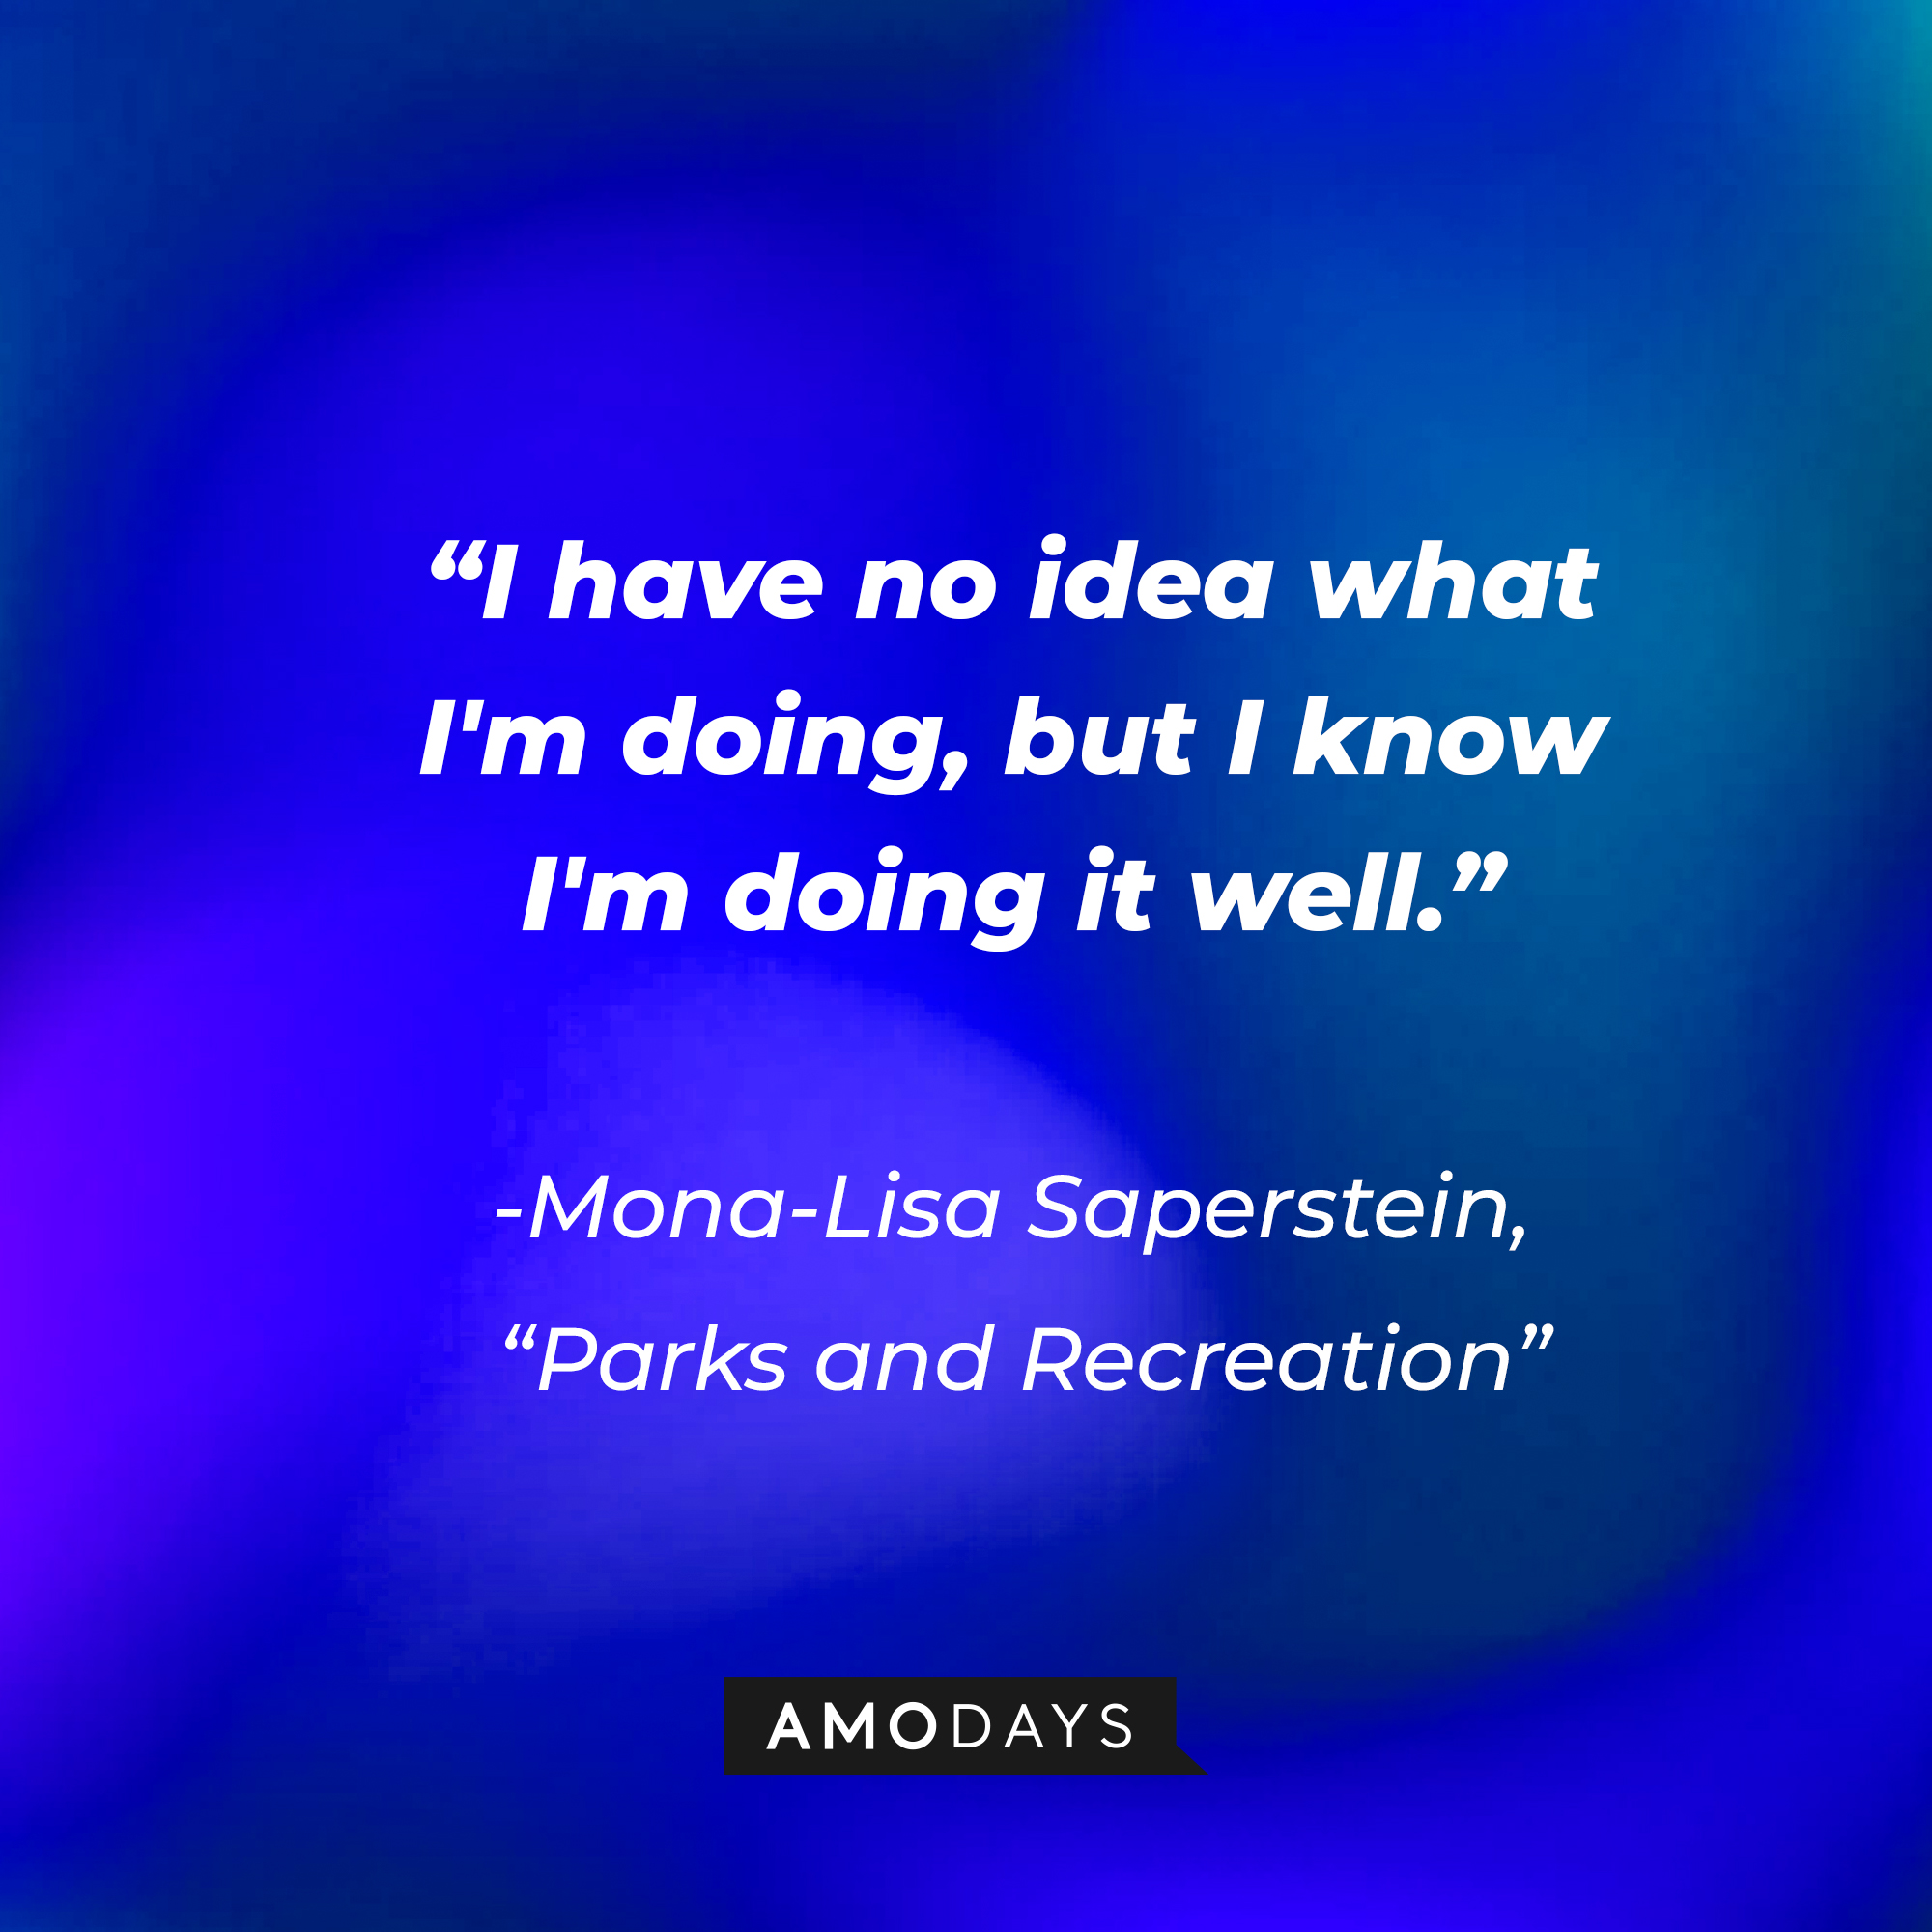 Mona-Lisa Saperstein's quote on "Parks and Recreation:" "I have no idea what I'm doing, but I know I'm doing it well." | Source: AmoDays